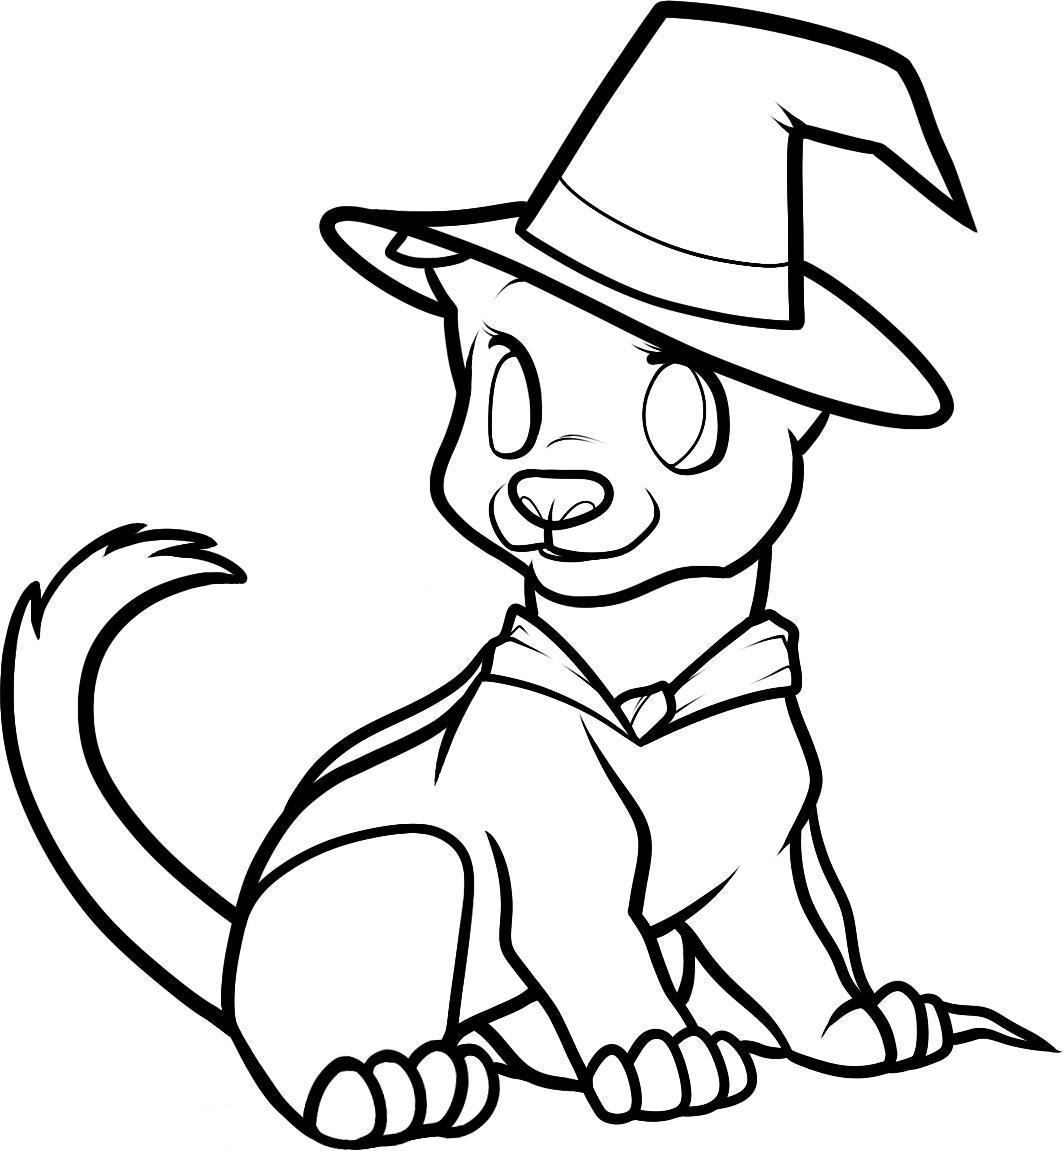 Cute Halloween Coloring Pages   Best Coloring Pages For Kids